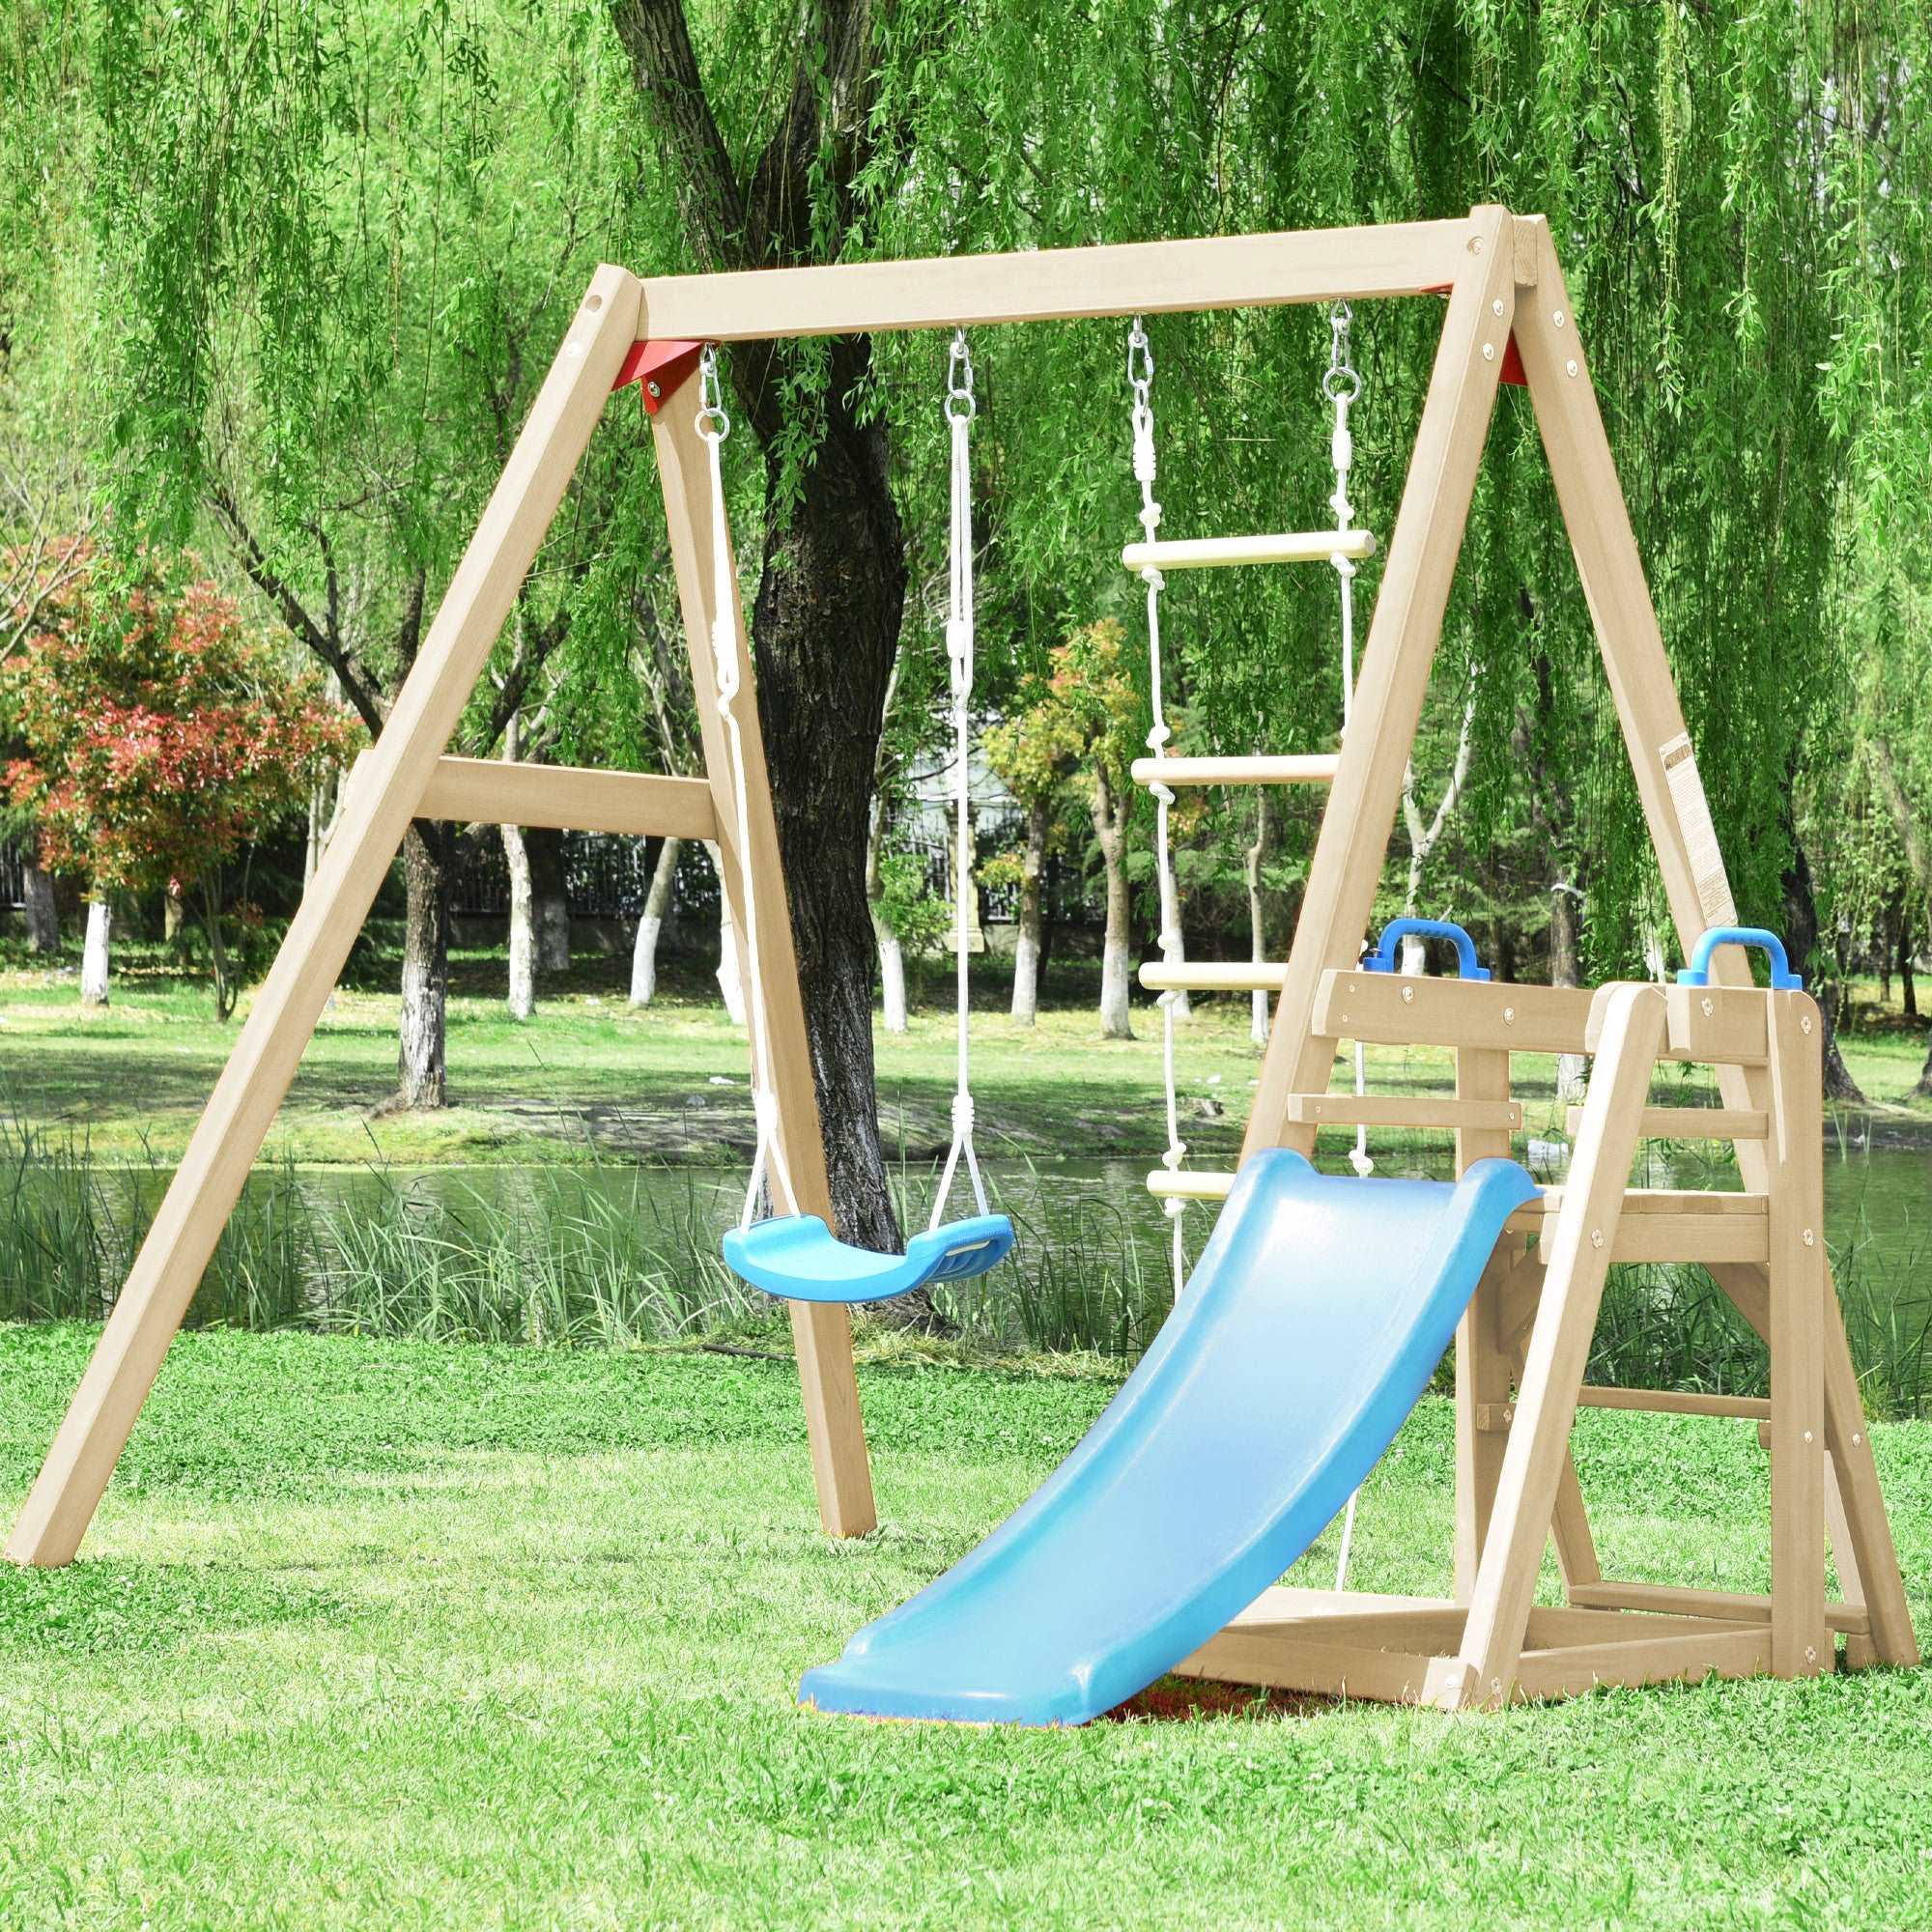 Bellemave Wooden Swing Set with Slide, Outdoor Playset Backyard Activity Playground Climb Swing Outdoor Play Structure for Toddlers